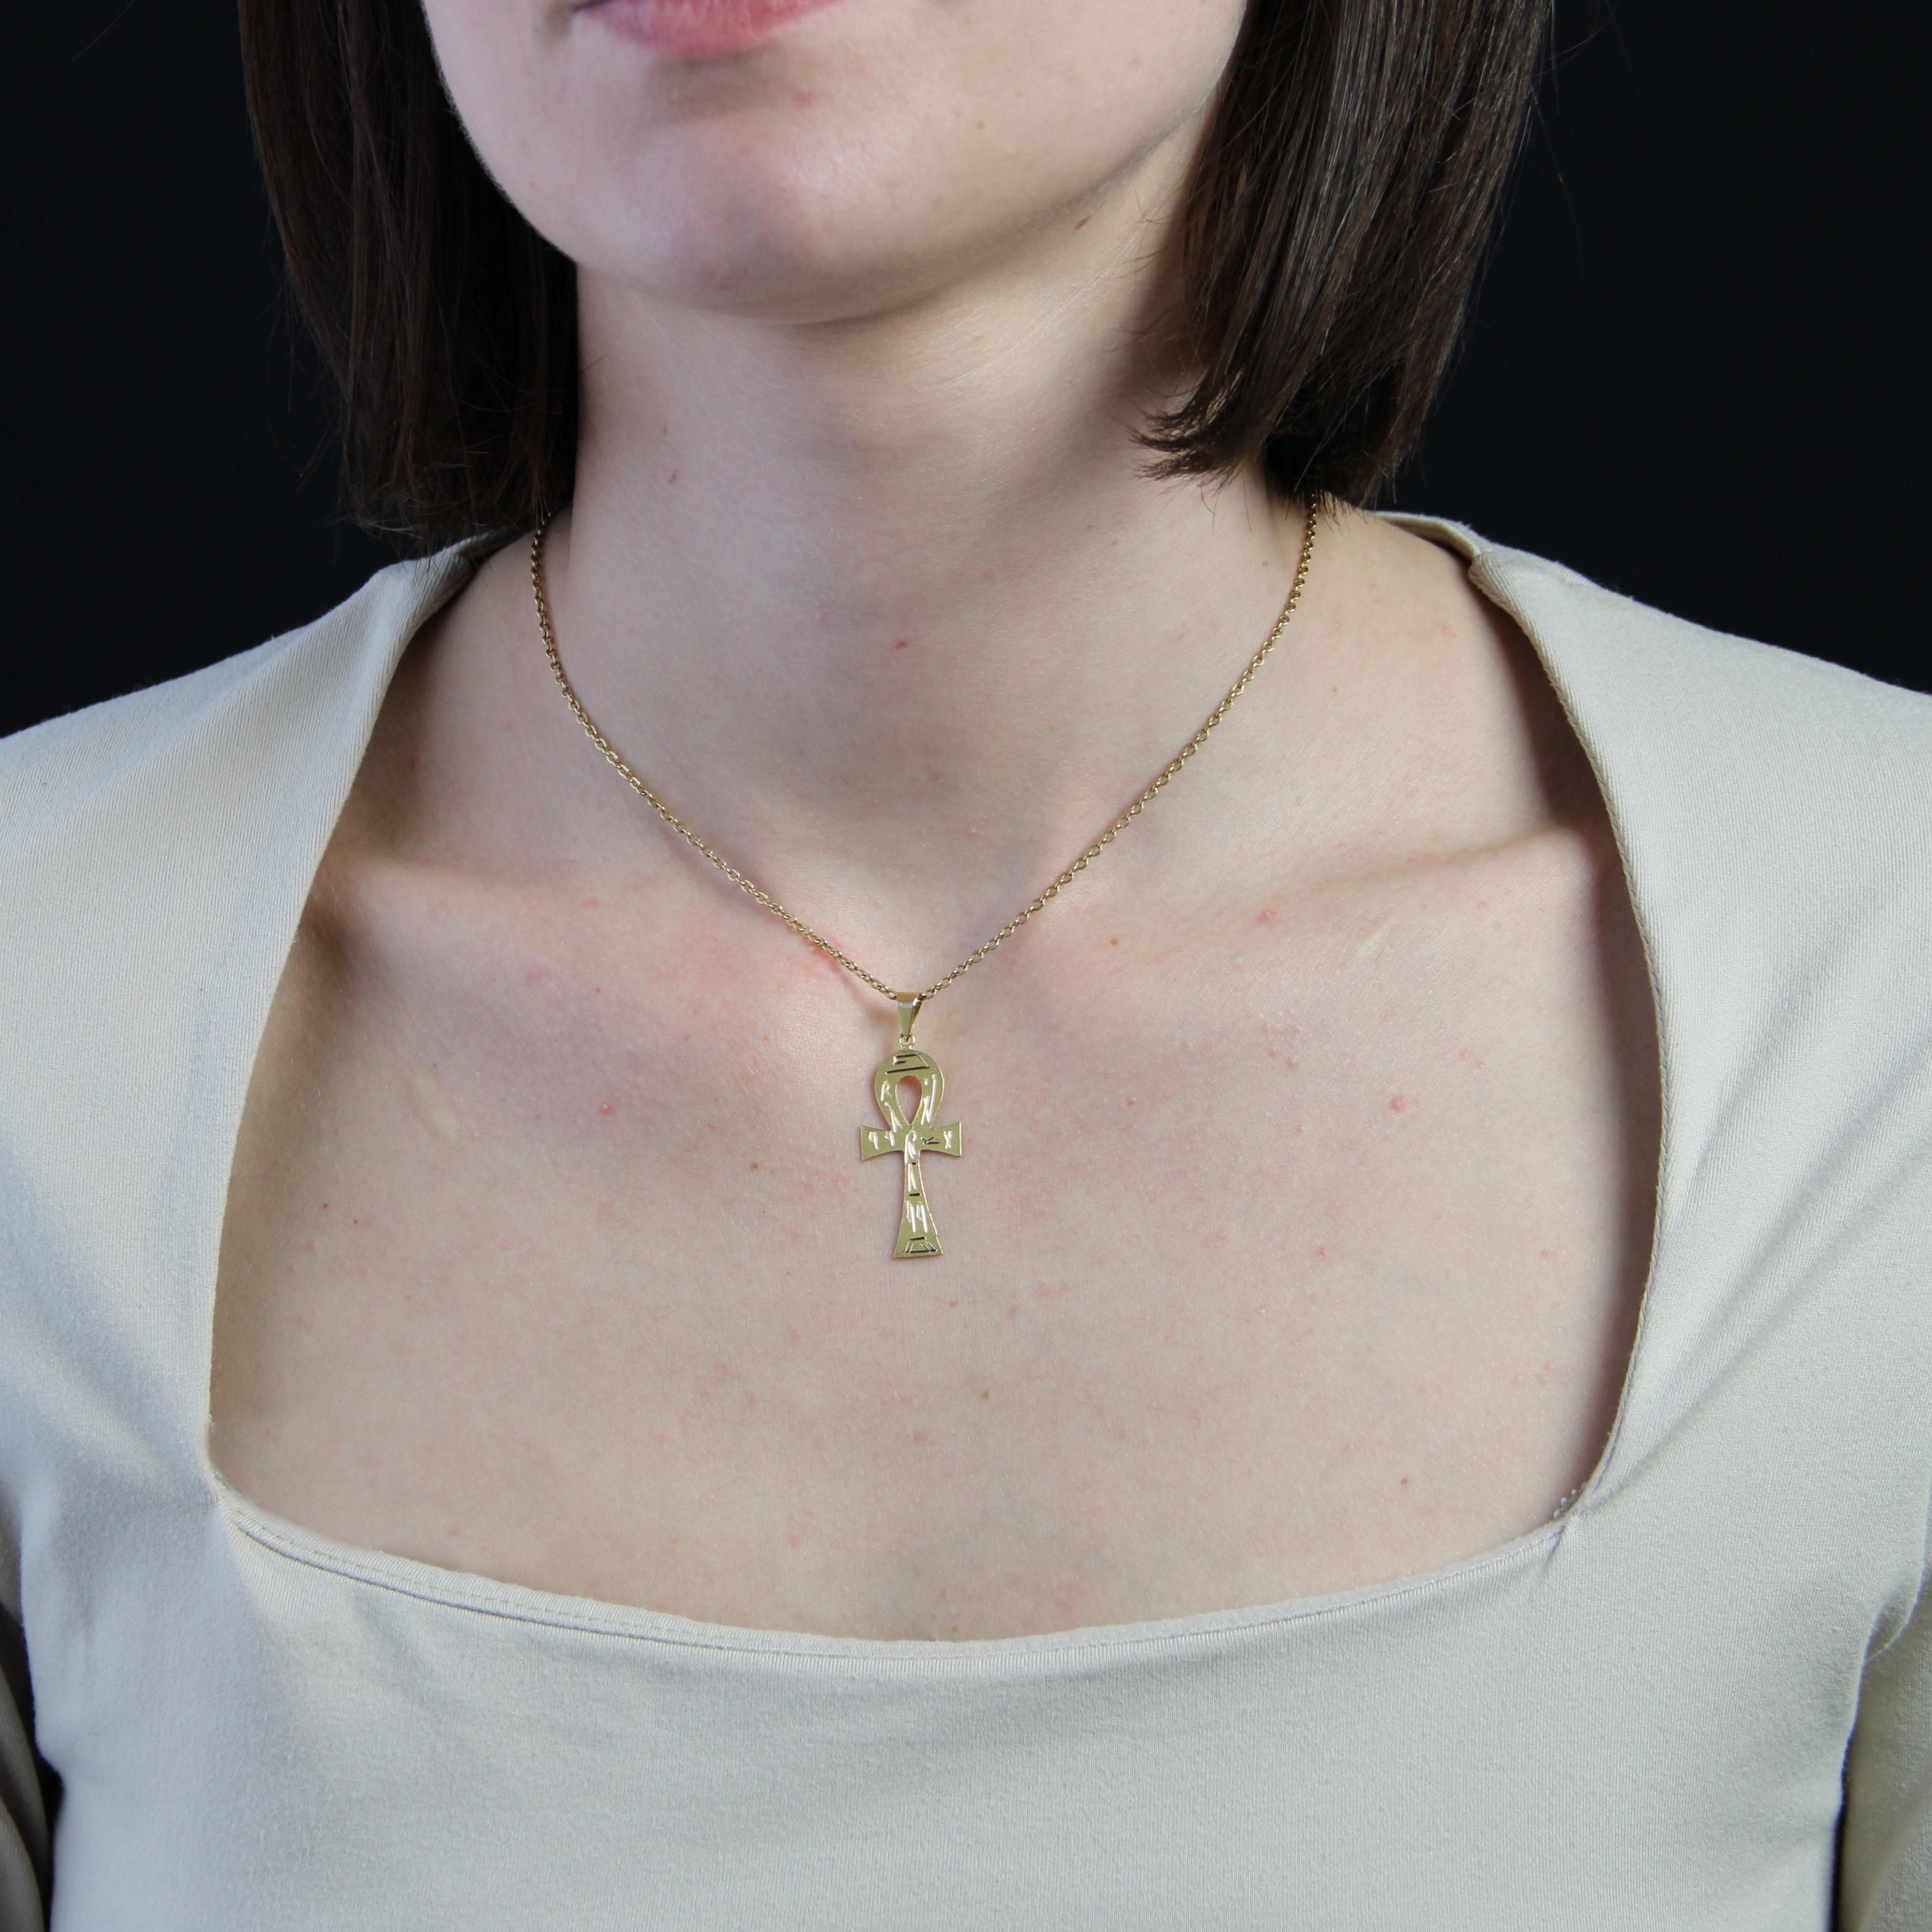 Pendant in 18 karat yellow gold.
This yellow gold pendant features a flat Egyptian cross engraved with Egyptian motifs.
Pendant sold alone without the chain of presentation.
Height : 4,1 cm approximately, width : 1,5 cm approximately, thickness :